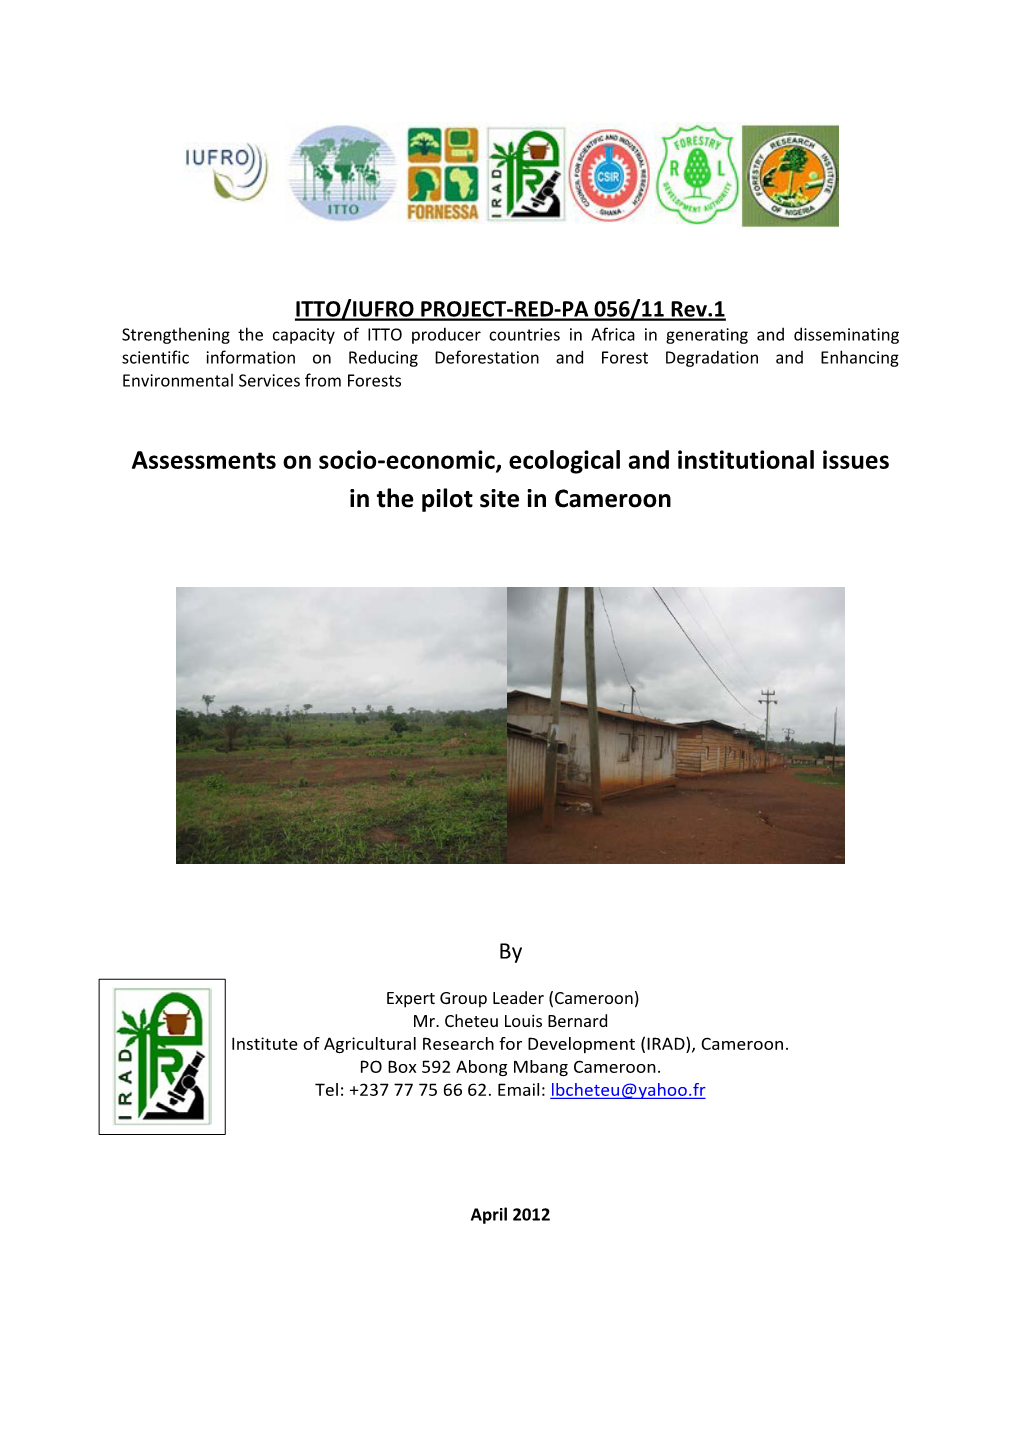 Assessments on Socio-Economic, Ecological and Institutional Issues in the Pilot Site in Cameroon